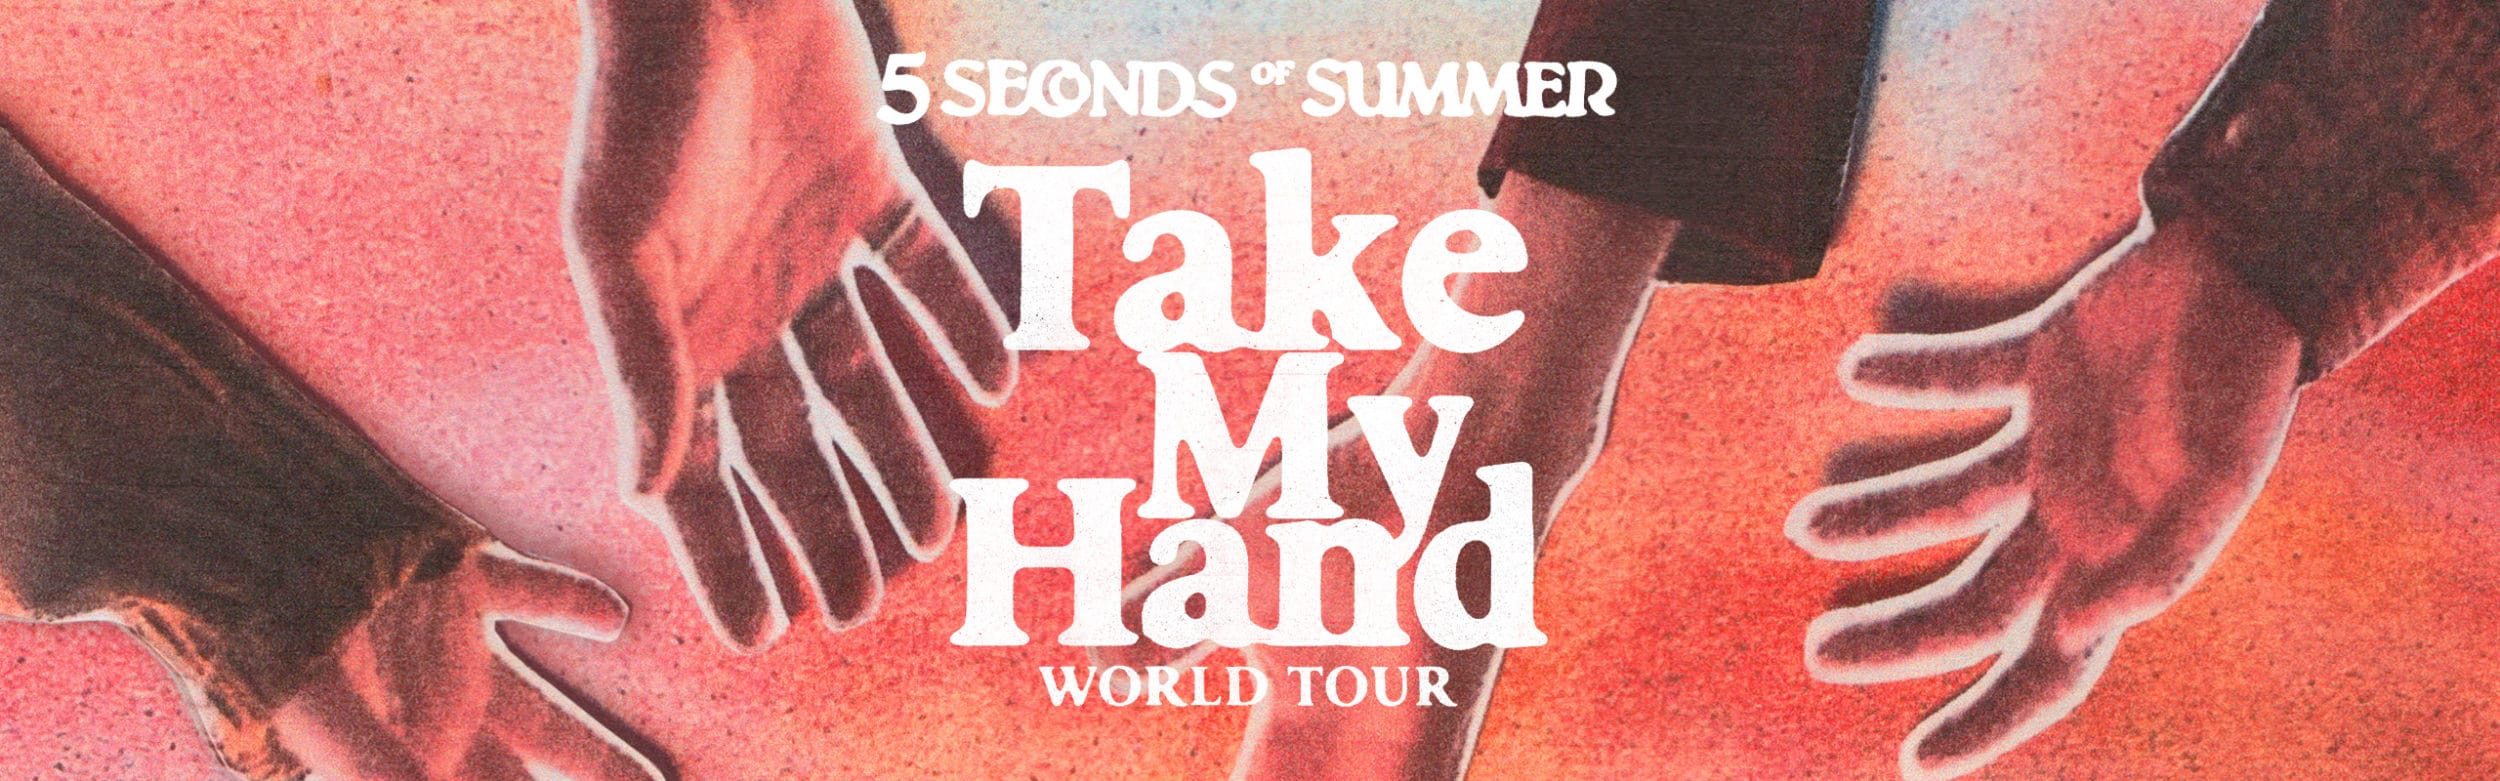 5 Seconds of Summer: Take My Hand World Tour